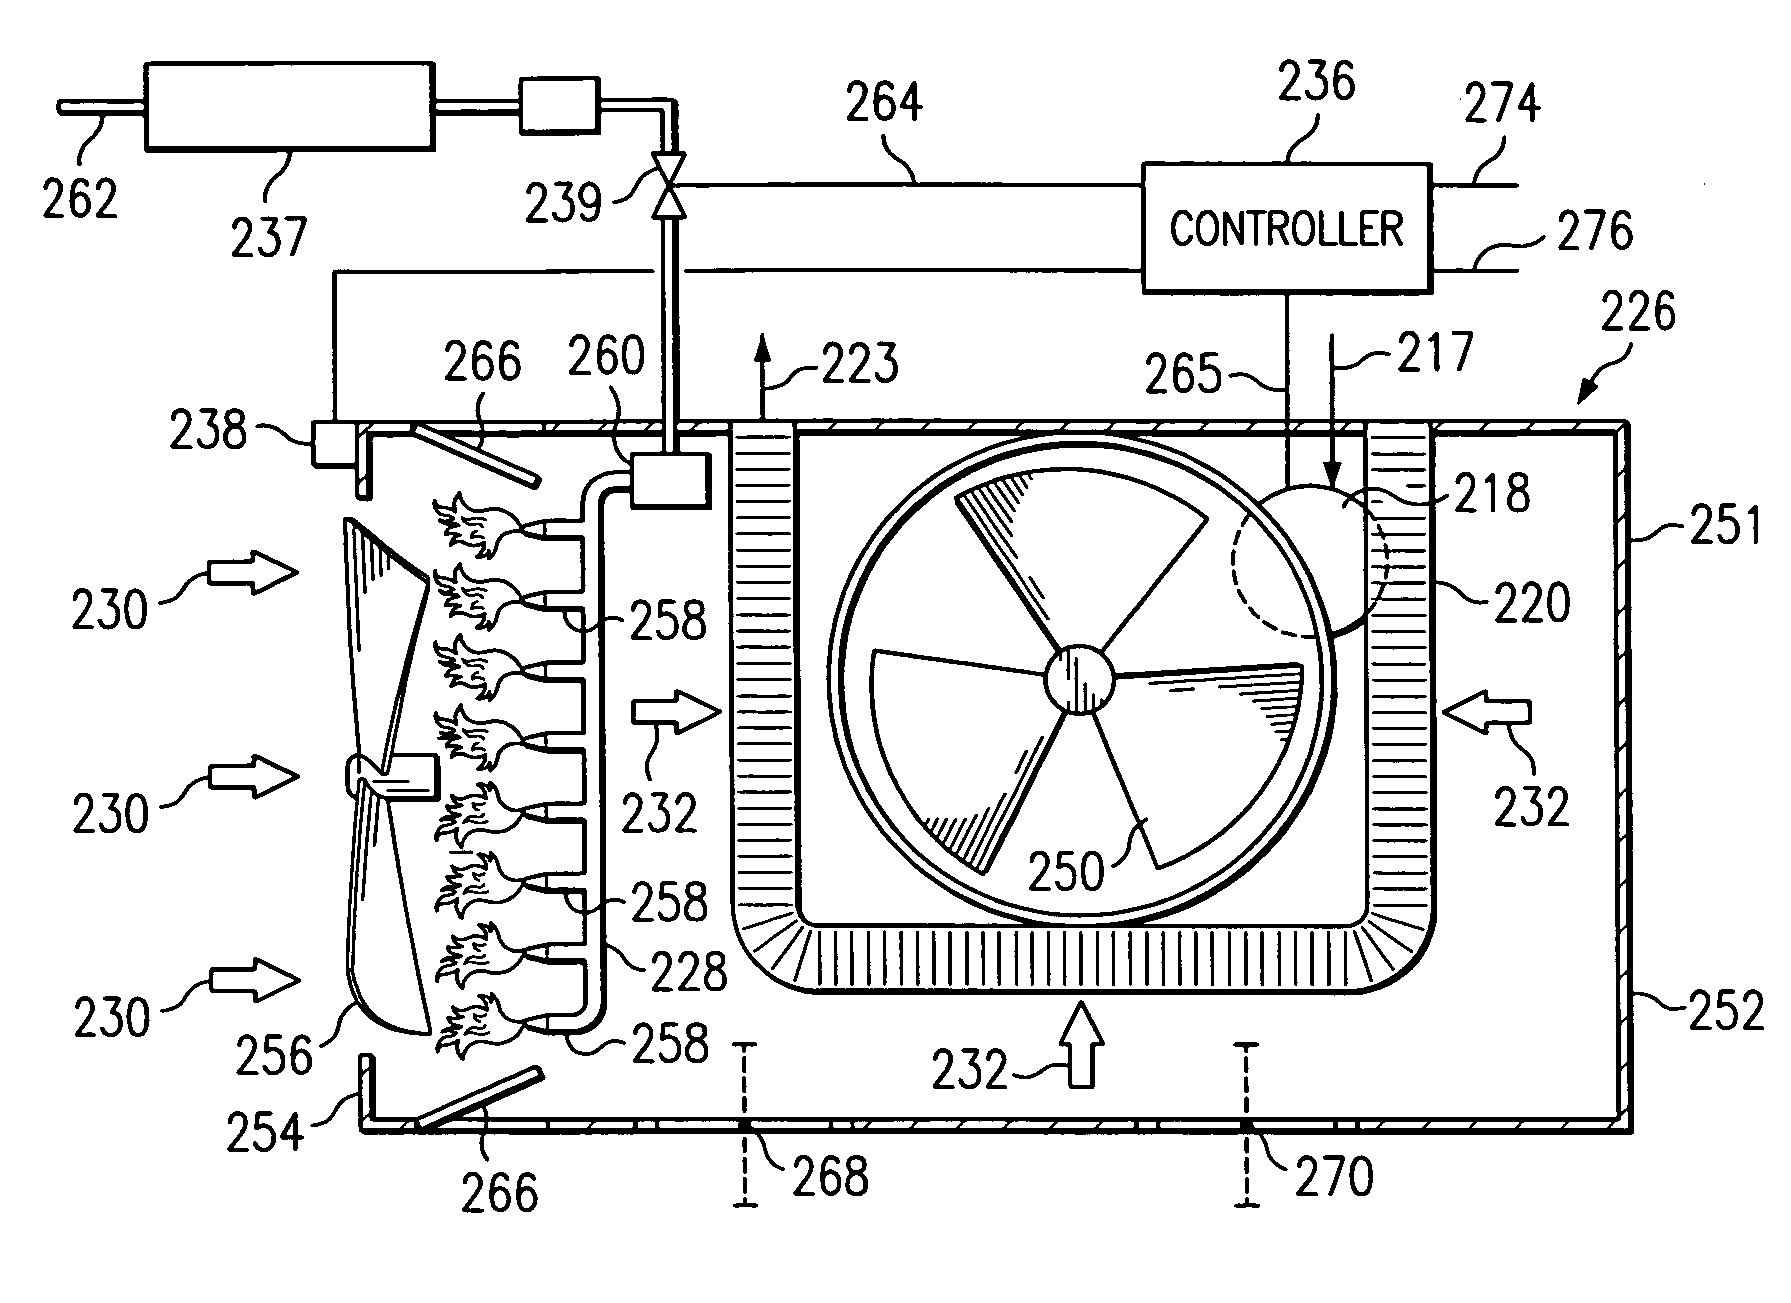 System and method for cooling air